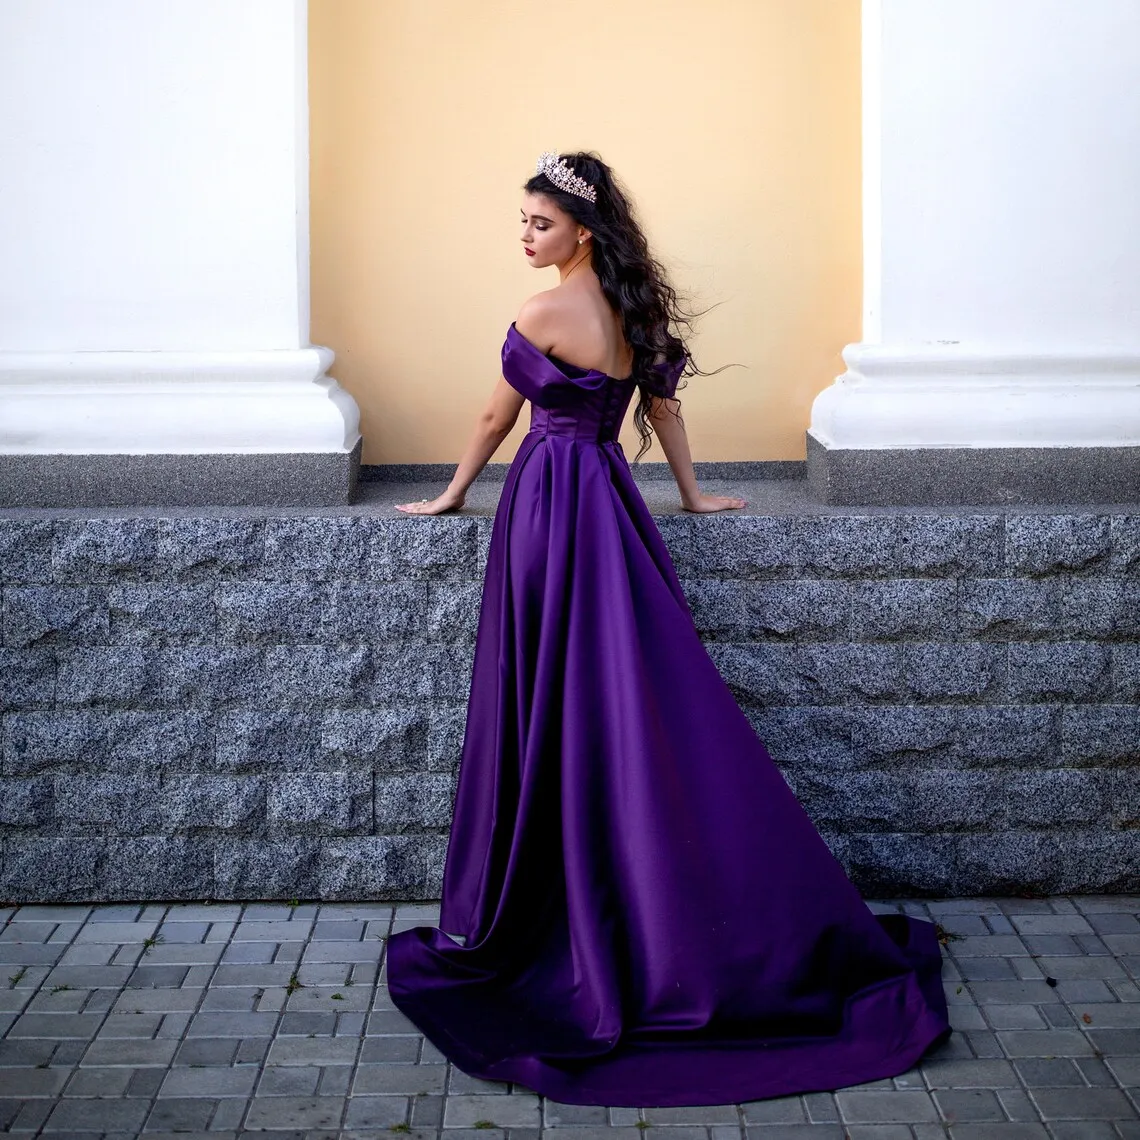 Buy Women's Long Strapless Prom Dress High-Low Satin Formal Evening Ball  Gowns with Pockets Purple Plus Size 22 at Amazon.in